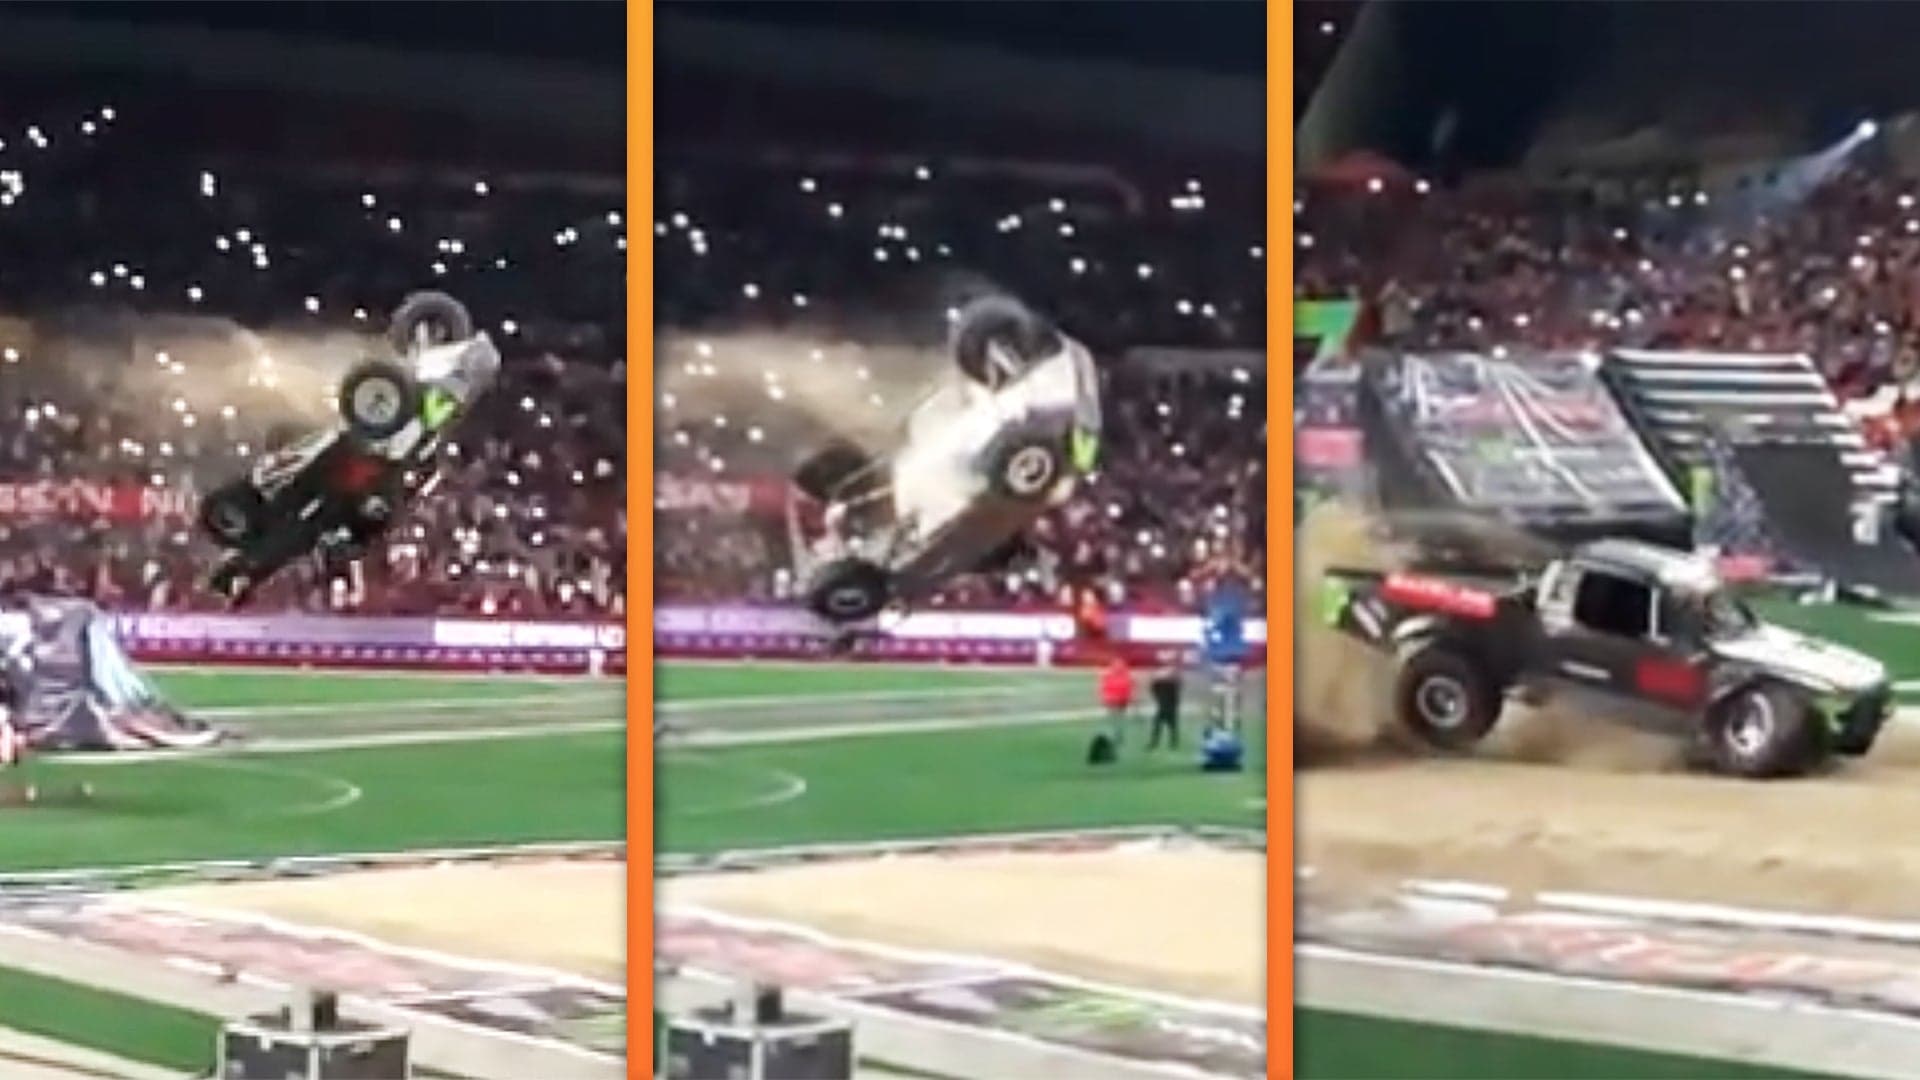 Watch This Ford Raptor Trophy Truck Pull Off a Crazy Barrel Roll